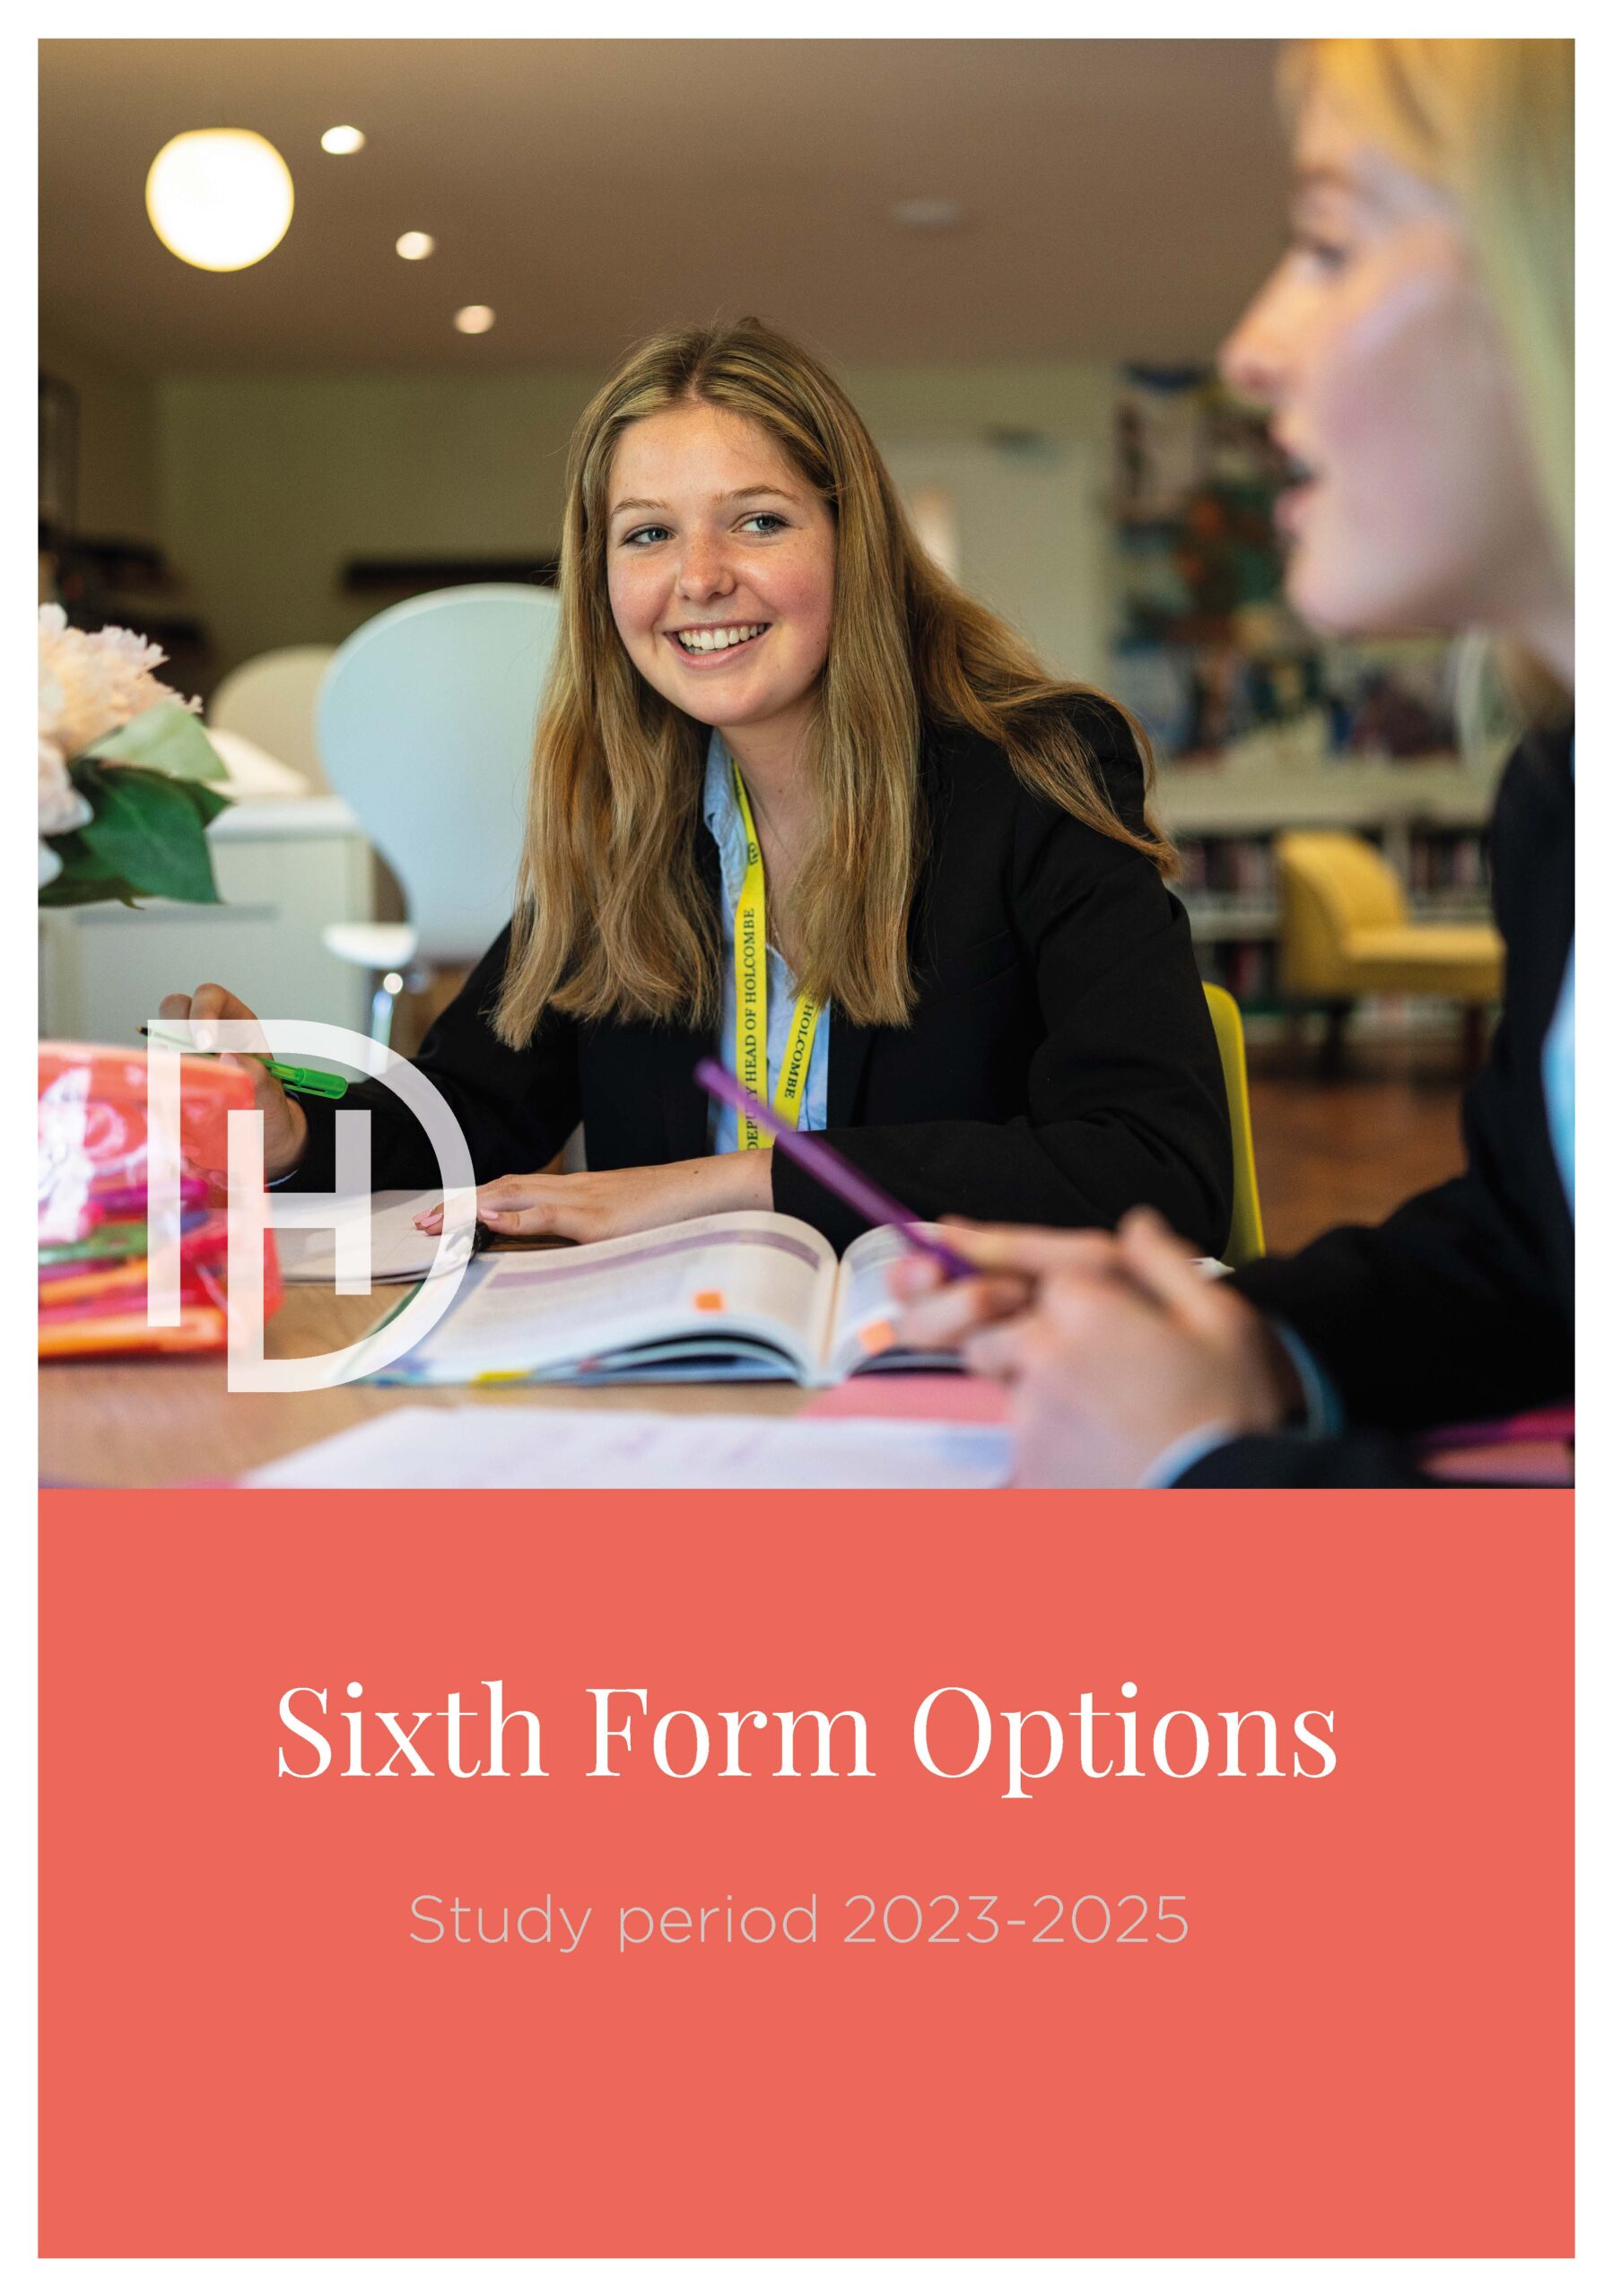 Sixth Form subjects booklet